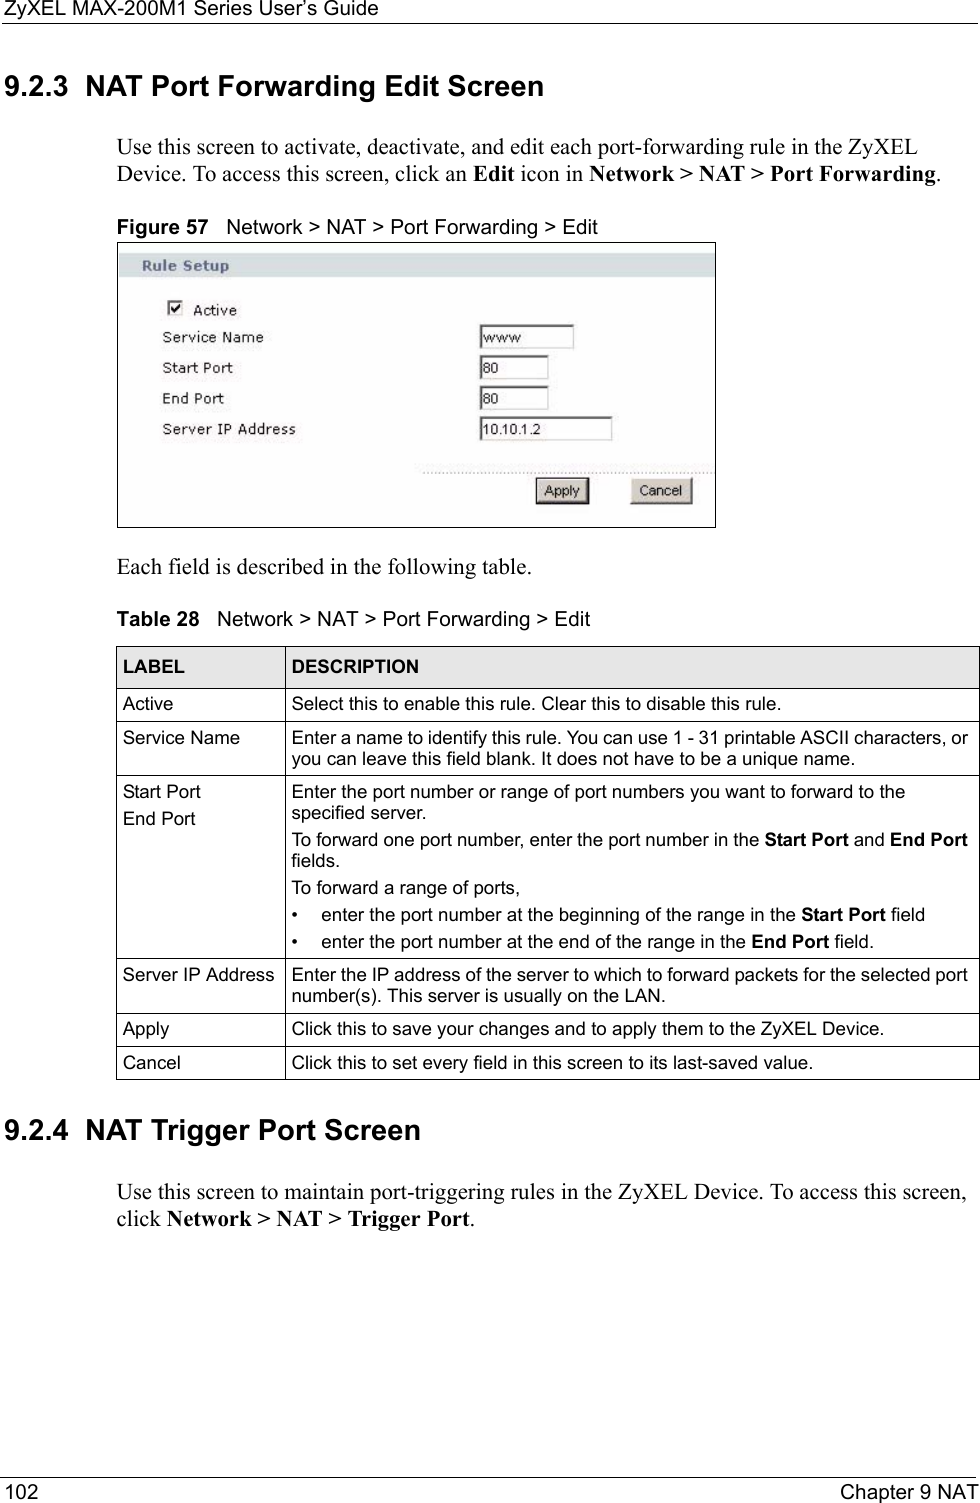 ZyXEL MAX-200M1 Series User’s Guide102 Chapter 9 NAT9.2.3  NAT Port Forwarding Edit ScreenUse this screen to activate, deactivate, and edit each port-forwarding rule in the ZyXEL Device. To access this screen, click an Edit icon in Network &gt; NAT &gt; Port Forwarding.Figure 57   Network &gt; NAT &gt; Port Forwarding &gt; EditEach field is described in the following table.9.2.4  NAT Trigger Port ScreenUse this screen to maintain port-triggering rules in the ZyXEL Device. To access this screen, click Network &gt; NAT &gt; Trigger Port.Table 28   Network &gt; NAT &gt; Port Forwarding &gt; EditLABEL DESCRIPTIONActive Select this to enable this rule. Clear this to disable this rule.Service Name Enter a name to identify this rule. You can use 1 - 31 printable ASCII characters, or you can leave this field blank. It does not have to be a unique name.Start PortEnd PortEnter the port number or range of port numbers you want to forward to the specified server.To forward one port number, enter the port number in the Start Port and End Port fields.To forward a range of ports,• enter the port number at the beginning of the range in the Start Port field• enter the port number at the end of the range in the End Port field.Server IP Address Enter the IP address of the server to which to forward packets for the selected port number(s). This server is usually on the LAN.Apply Click this to save your changes and to apply them to the ZyXEL Device.Cancel Click this to set every field in this screen to its last-saved value.